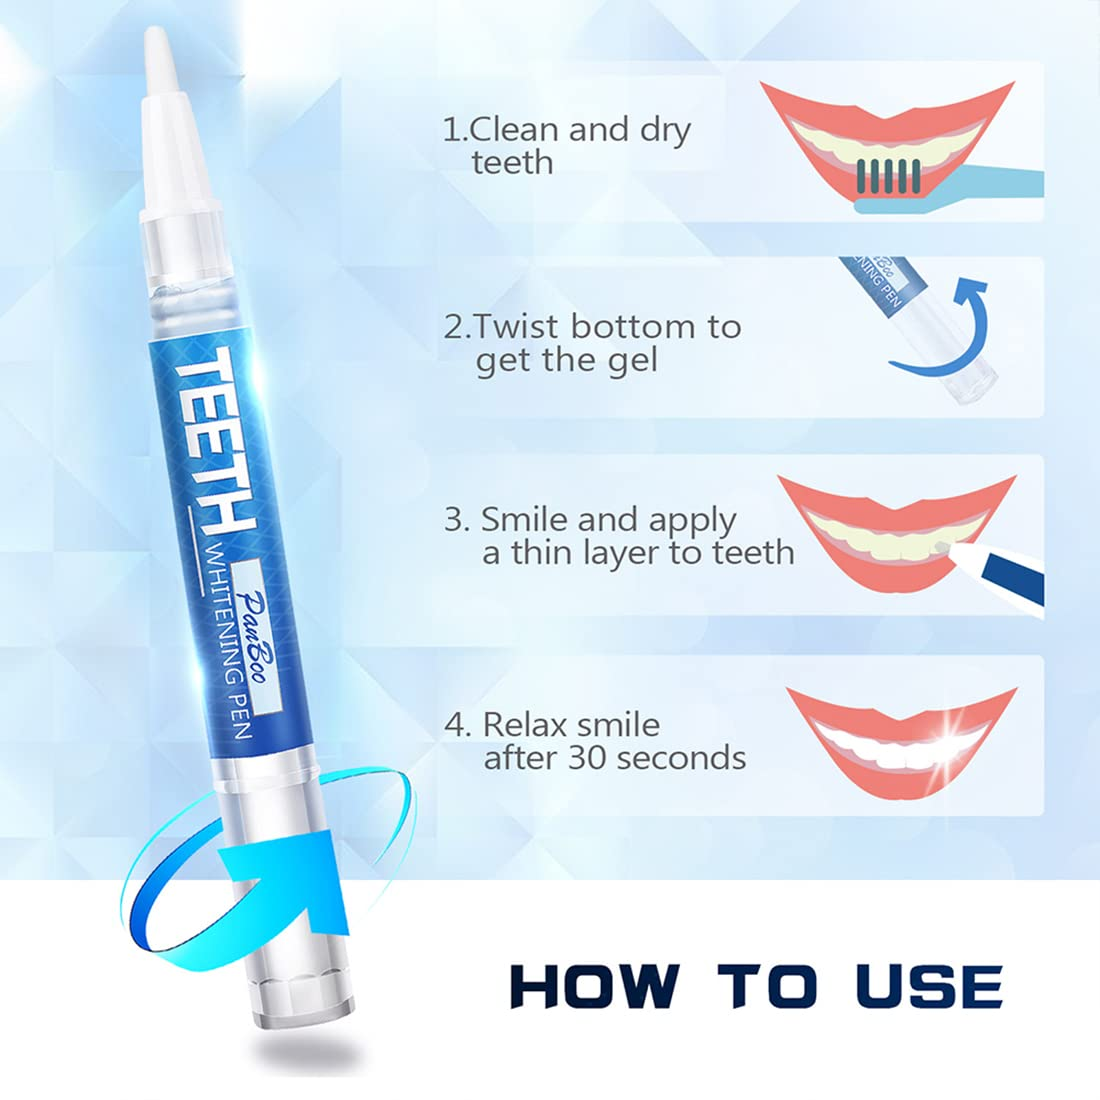 Teeth Whitening Pen, Use Twice a Day up to 1-6 Shade Whiter in 1-2 Weeks, 4 No Sensitivity Pens, 70+ Whitening Treatments, Effective, Pain Free and Enamel Safe, Easy to Use at Home Travel, Flavourless